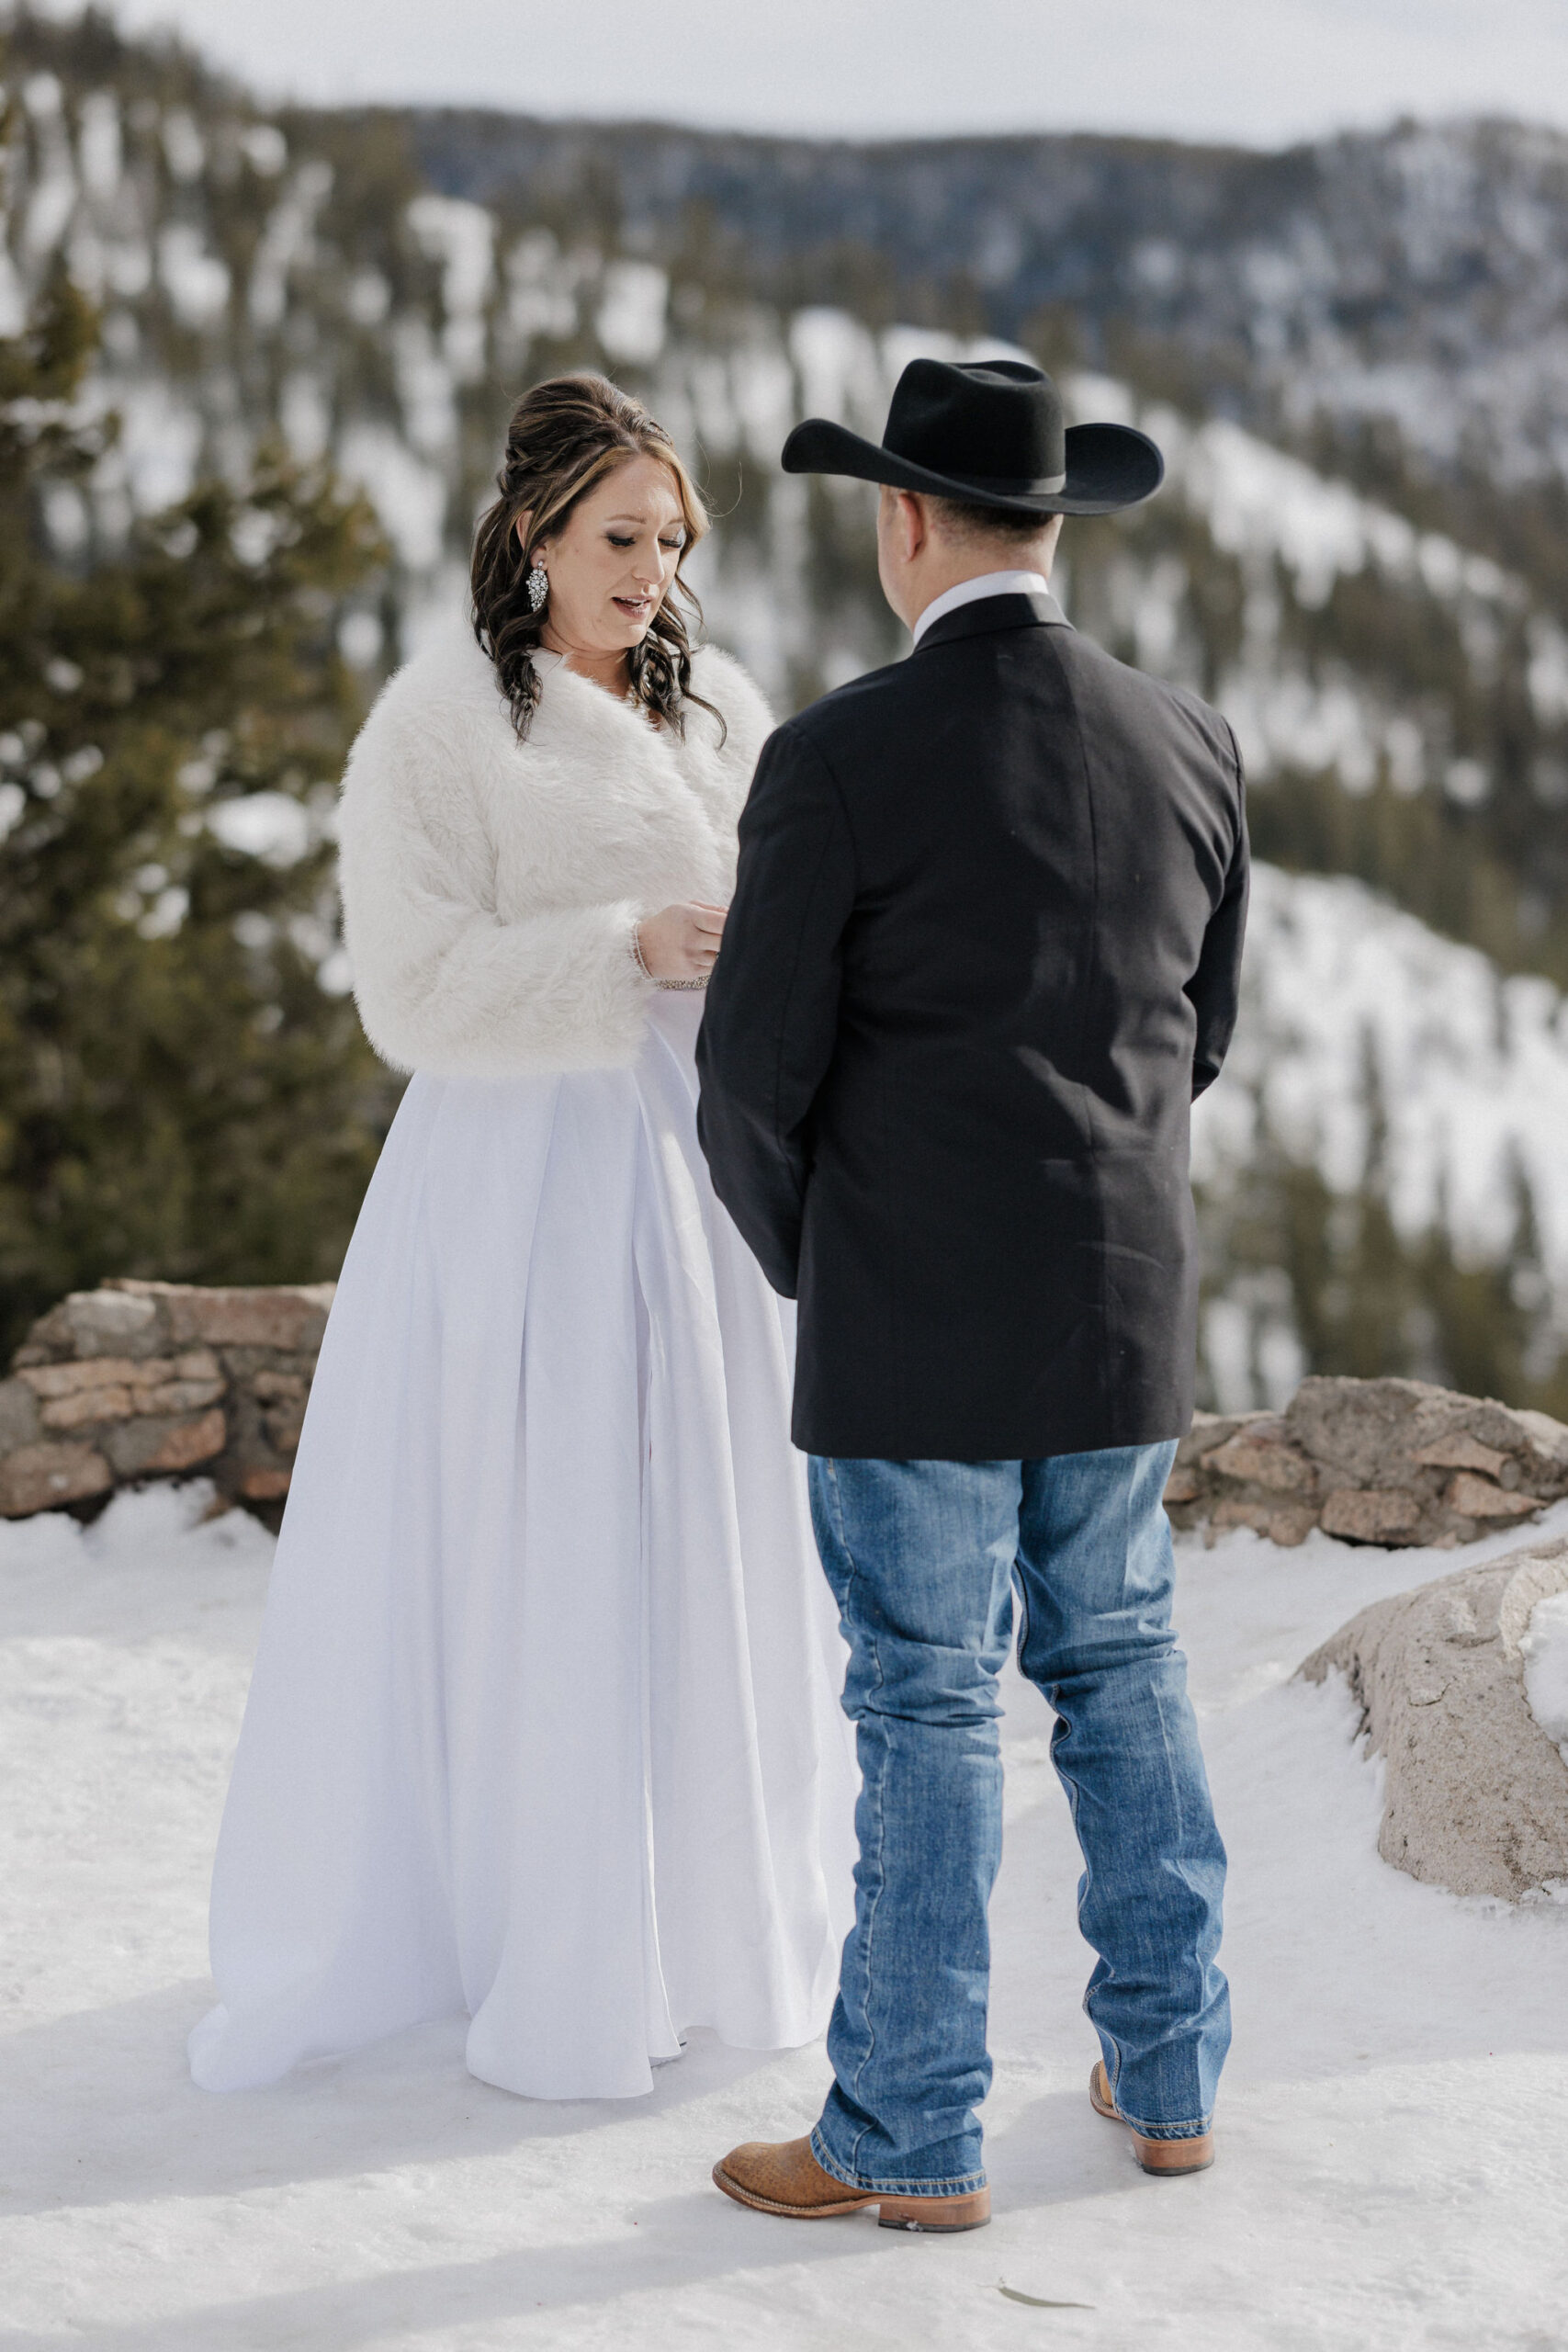 Bride reads vows to groom during Sapphire Point Overlook elopement.